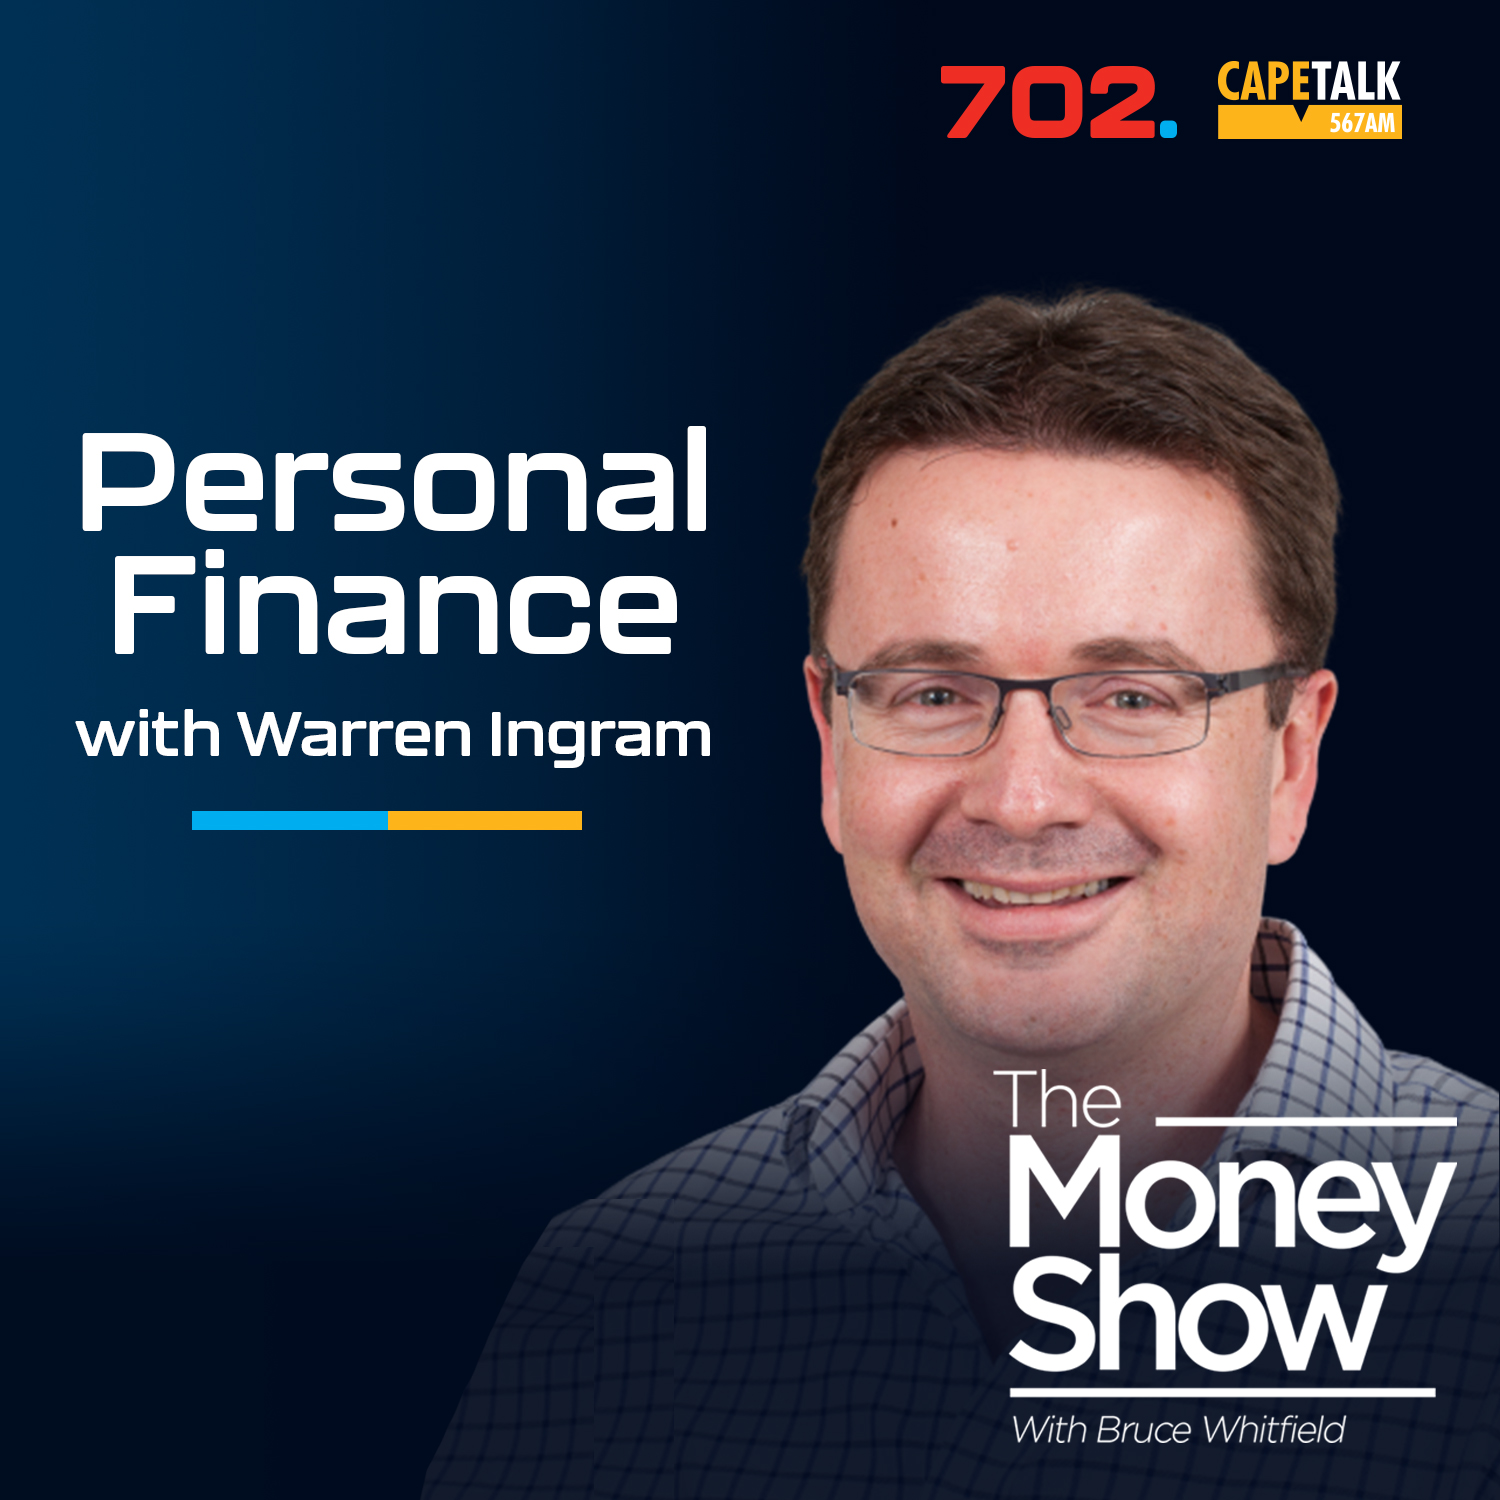 Personal Finance - After the looting and violence – is it time to pack your bags